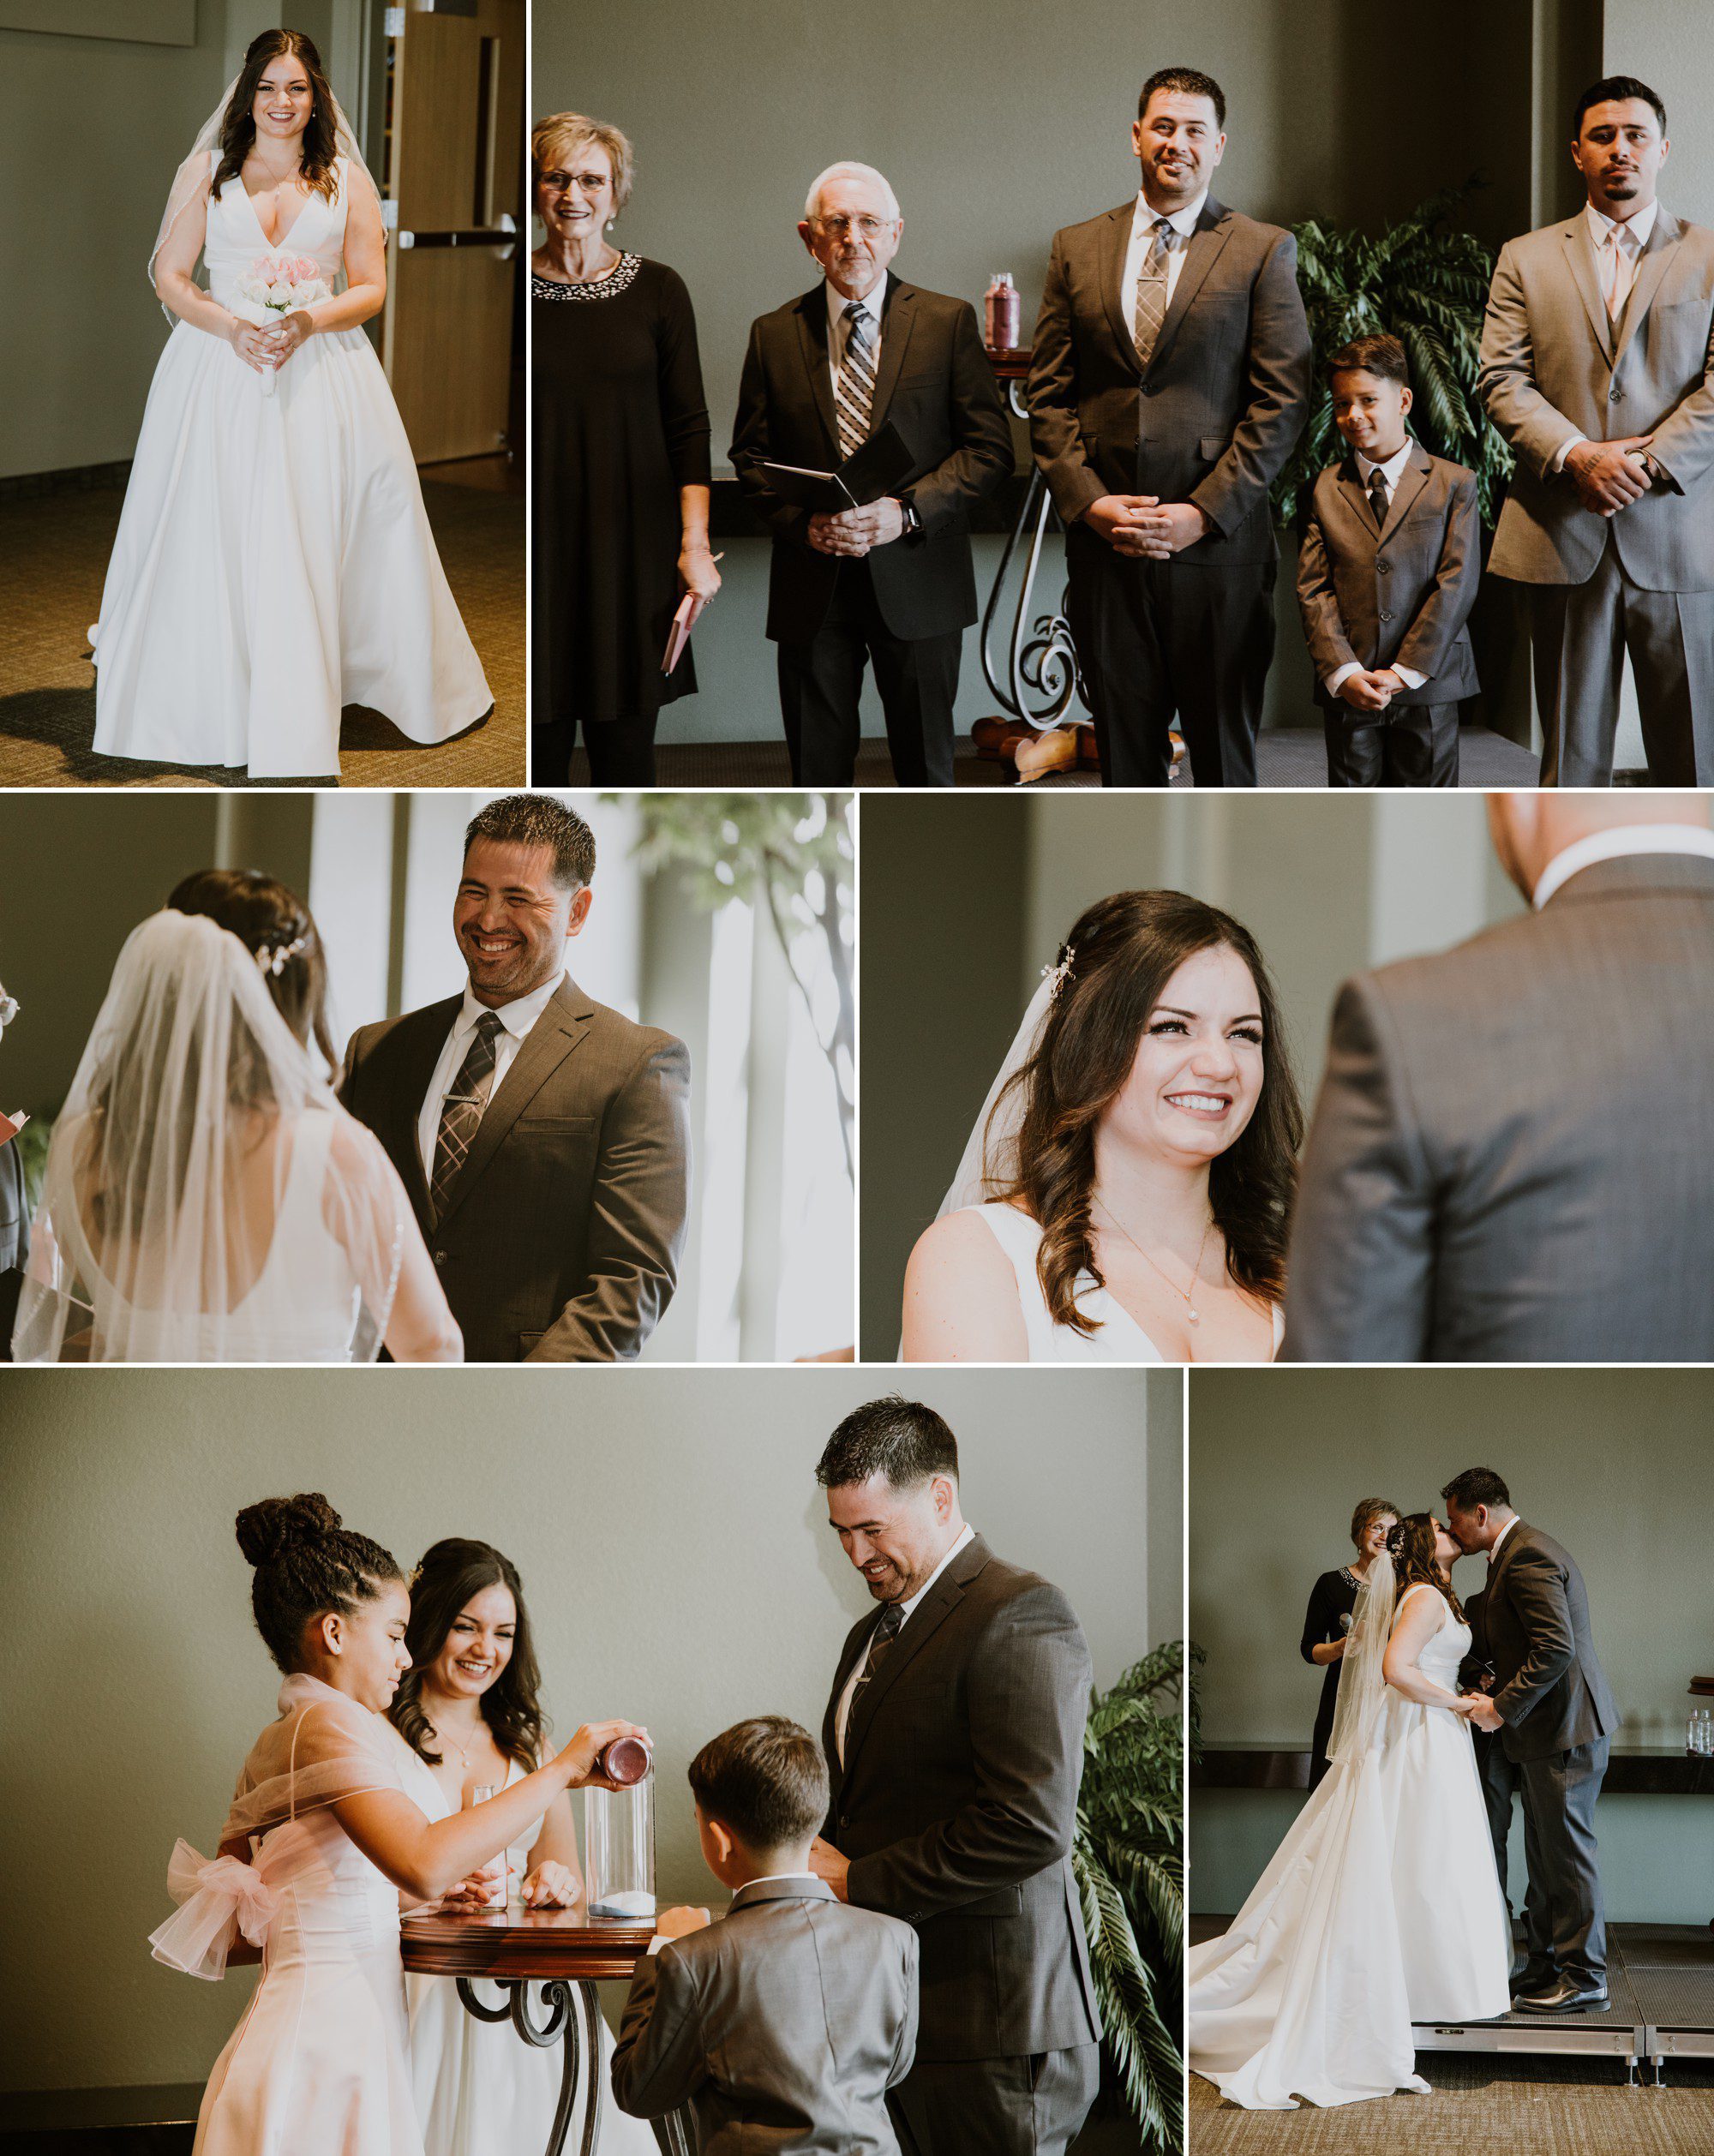 Bride and groom during wedding ceremony at Lawton First Assembly Church in Lawton OK, photos by Krista Lee photography Nashville TN